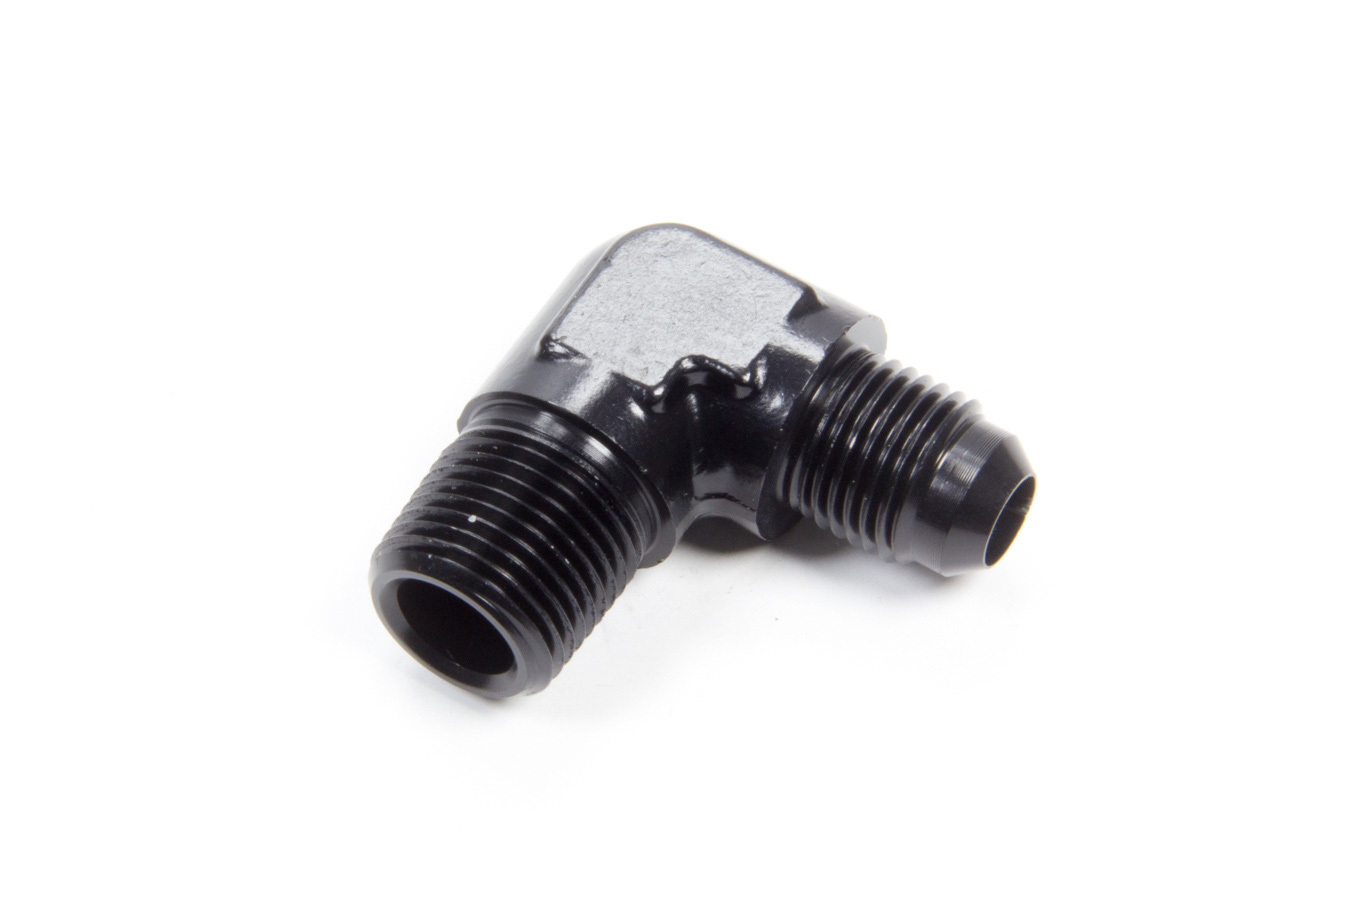 Aeroquip FCM5035 Fitting, Adapter, 90 Degree, 6 AN Male to 3/8 in NPT Male, Aluminum, Black Anodized, Each